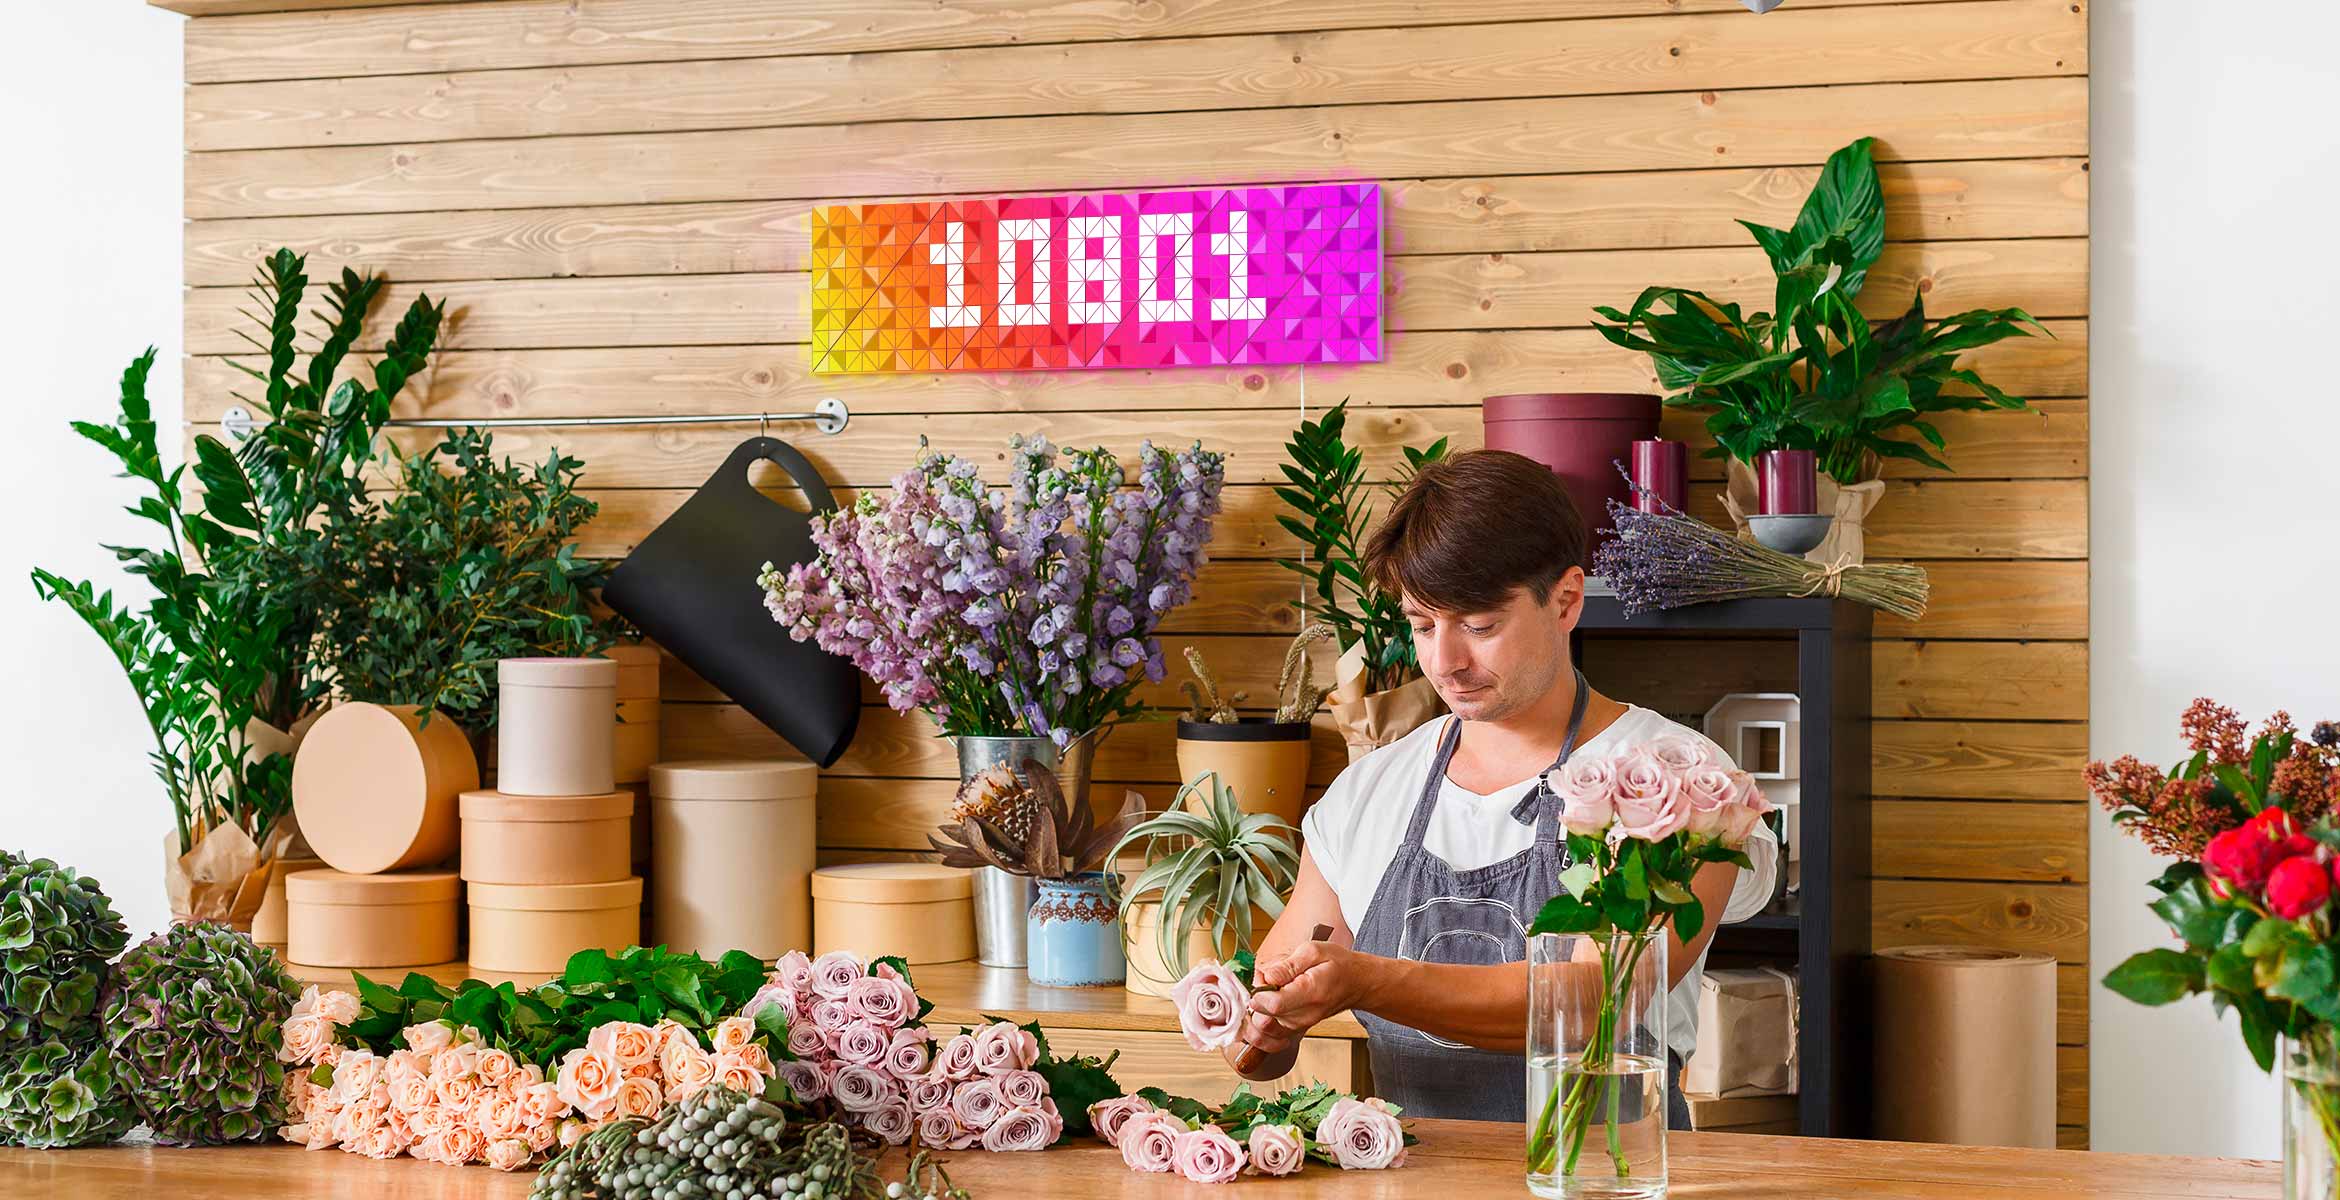 Infoscreen, assembled from 16 smart light surfaces, complements flower shop's interior and displays Instagram follower count